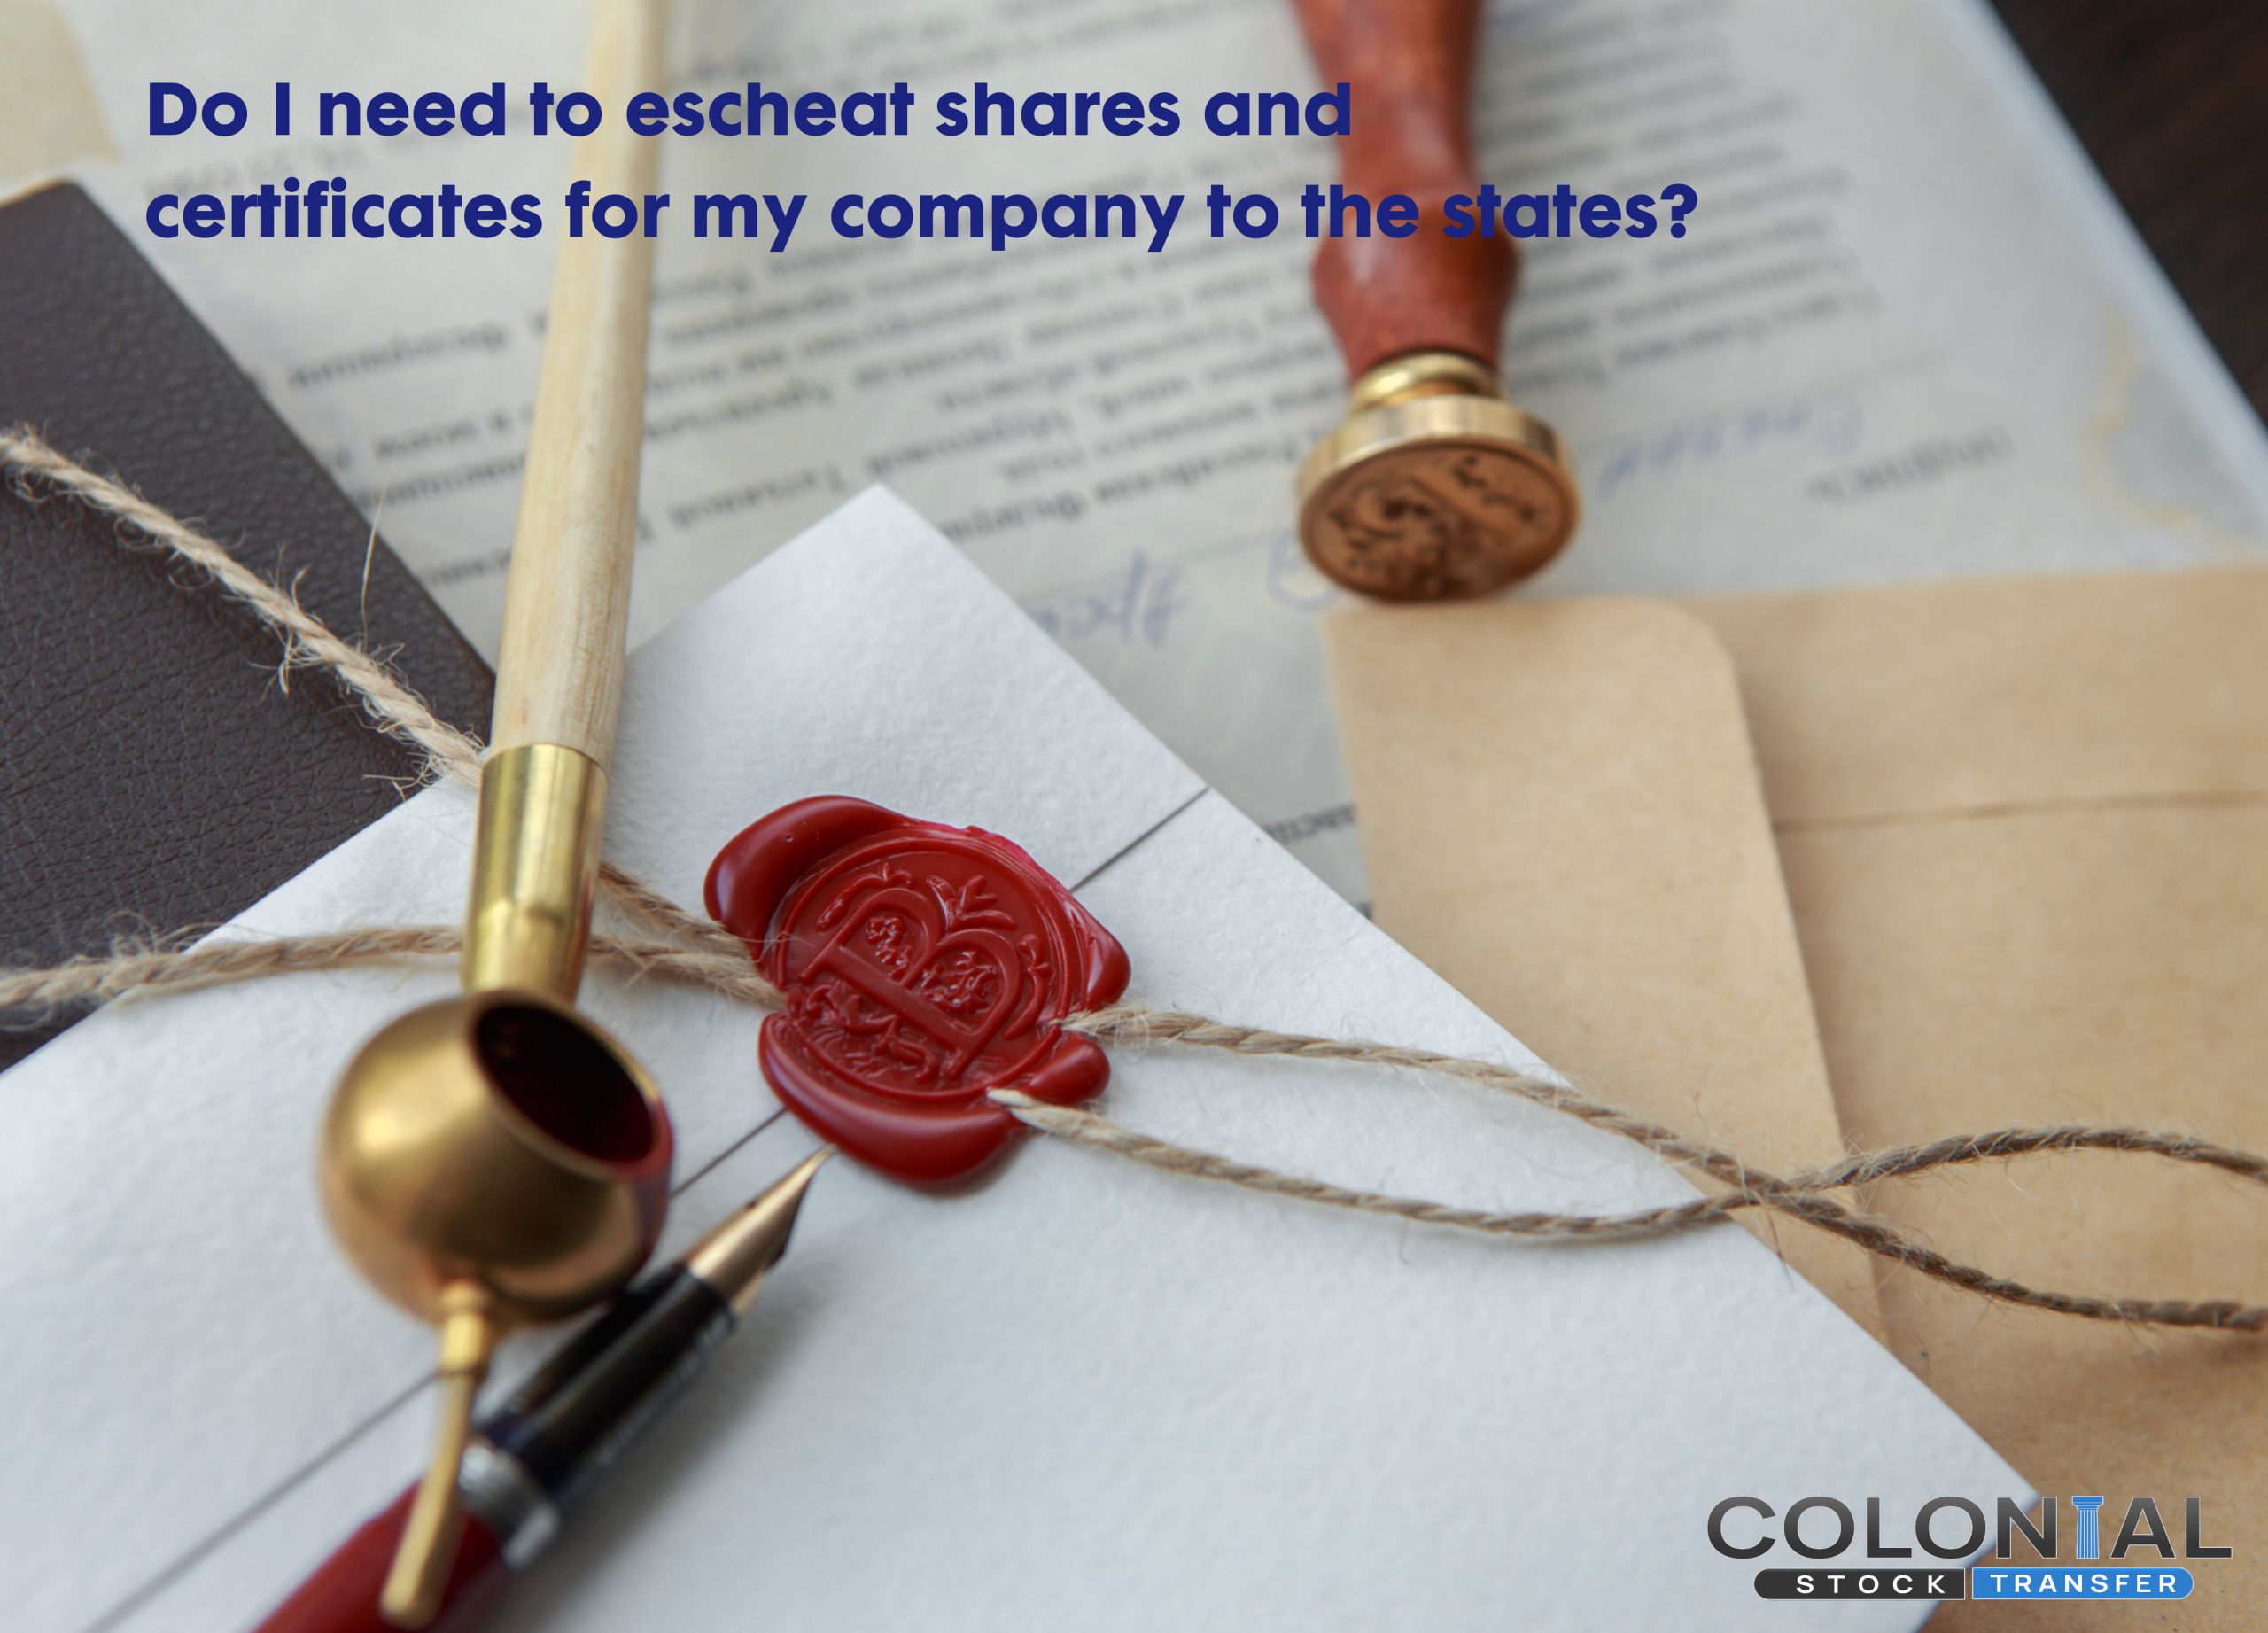 Do I need to escheat shares and certificates for my company to the states?